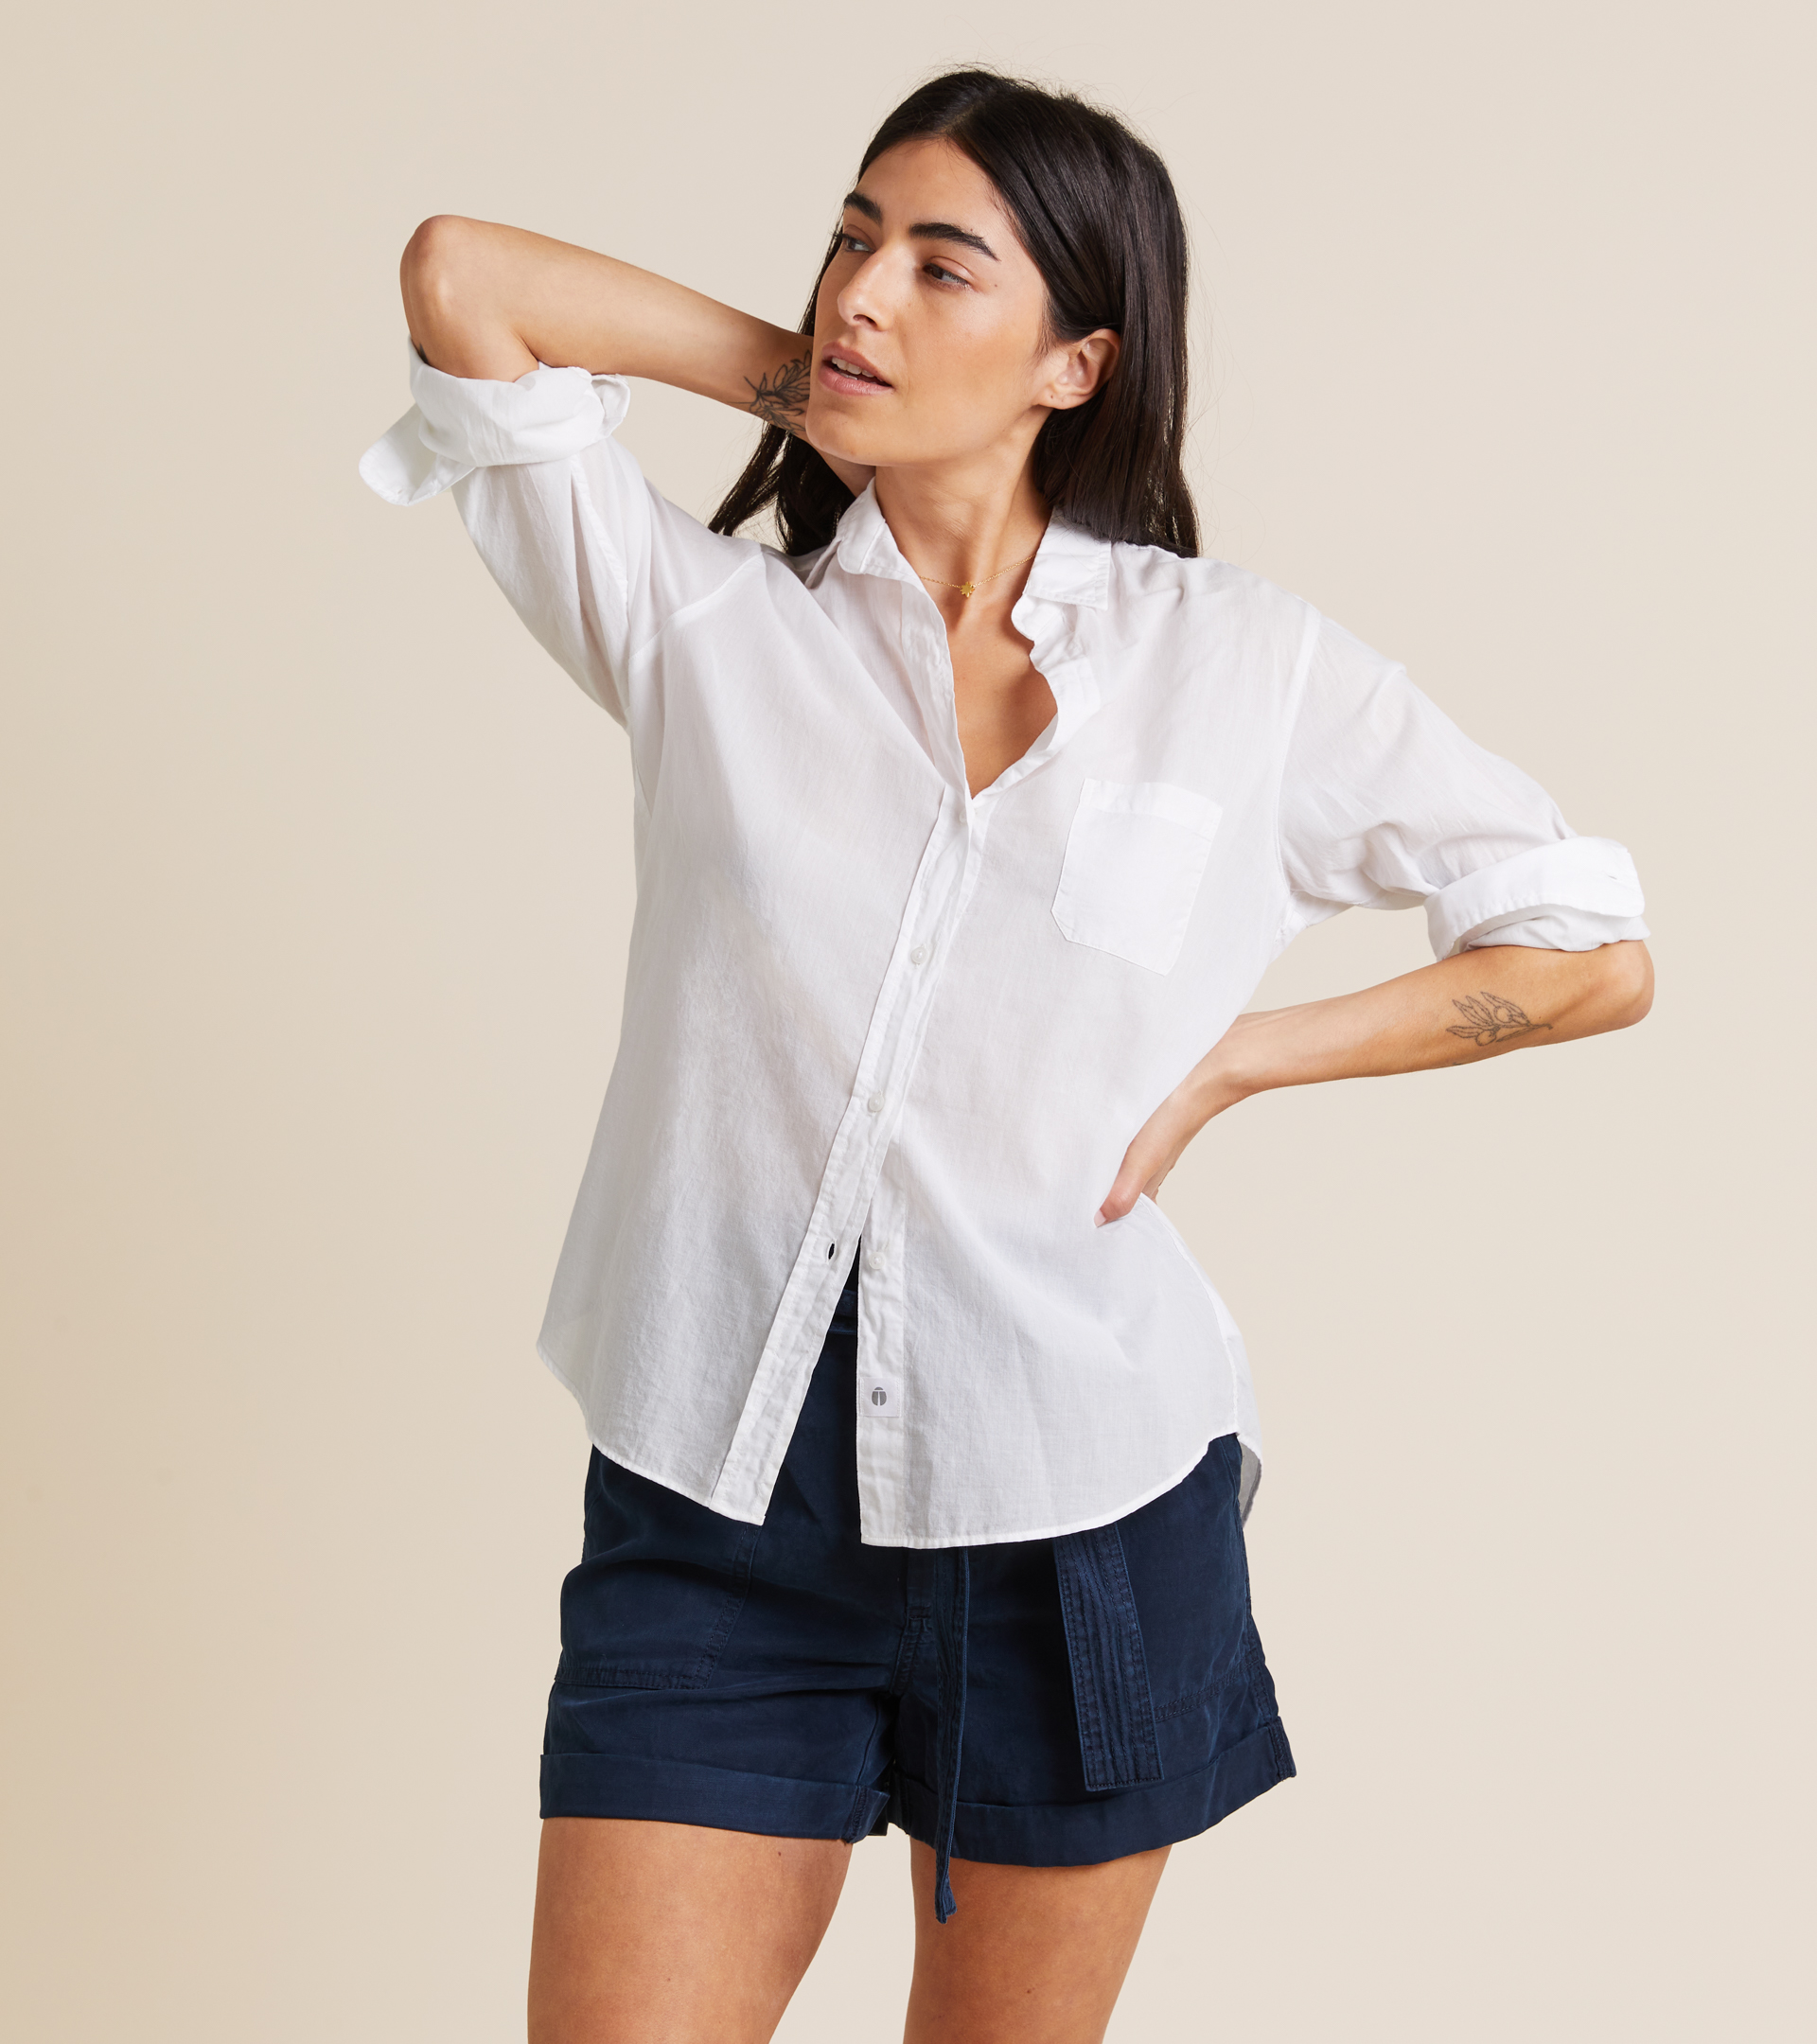 The Hero Button-Up Shirt Classic White, Tissue Cotton view 1